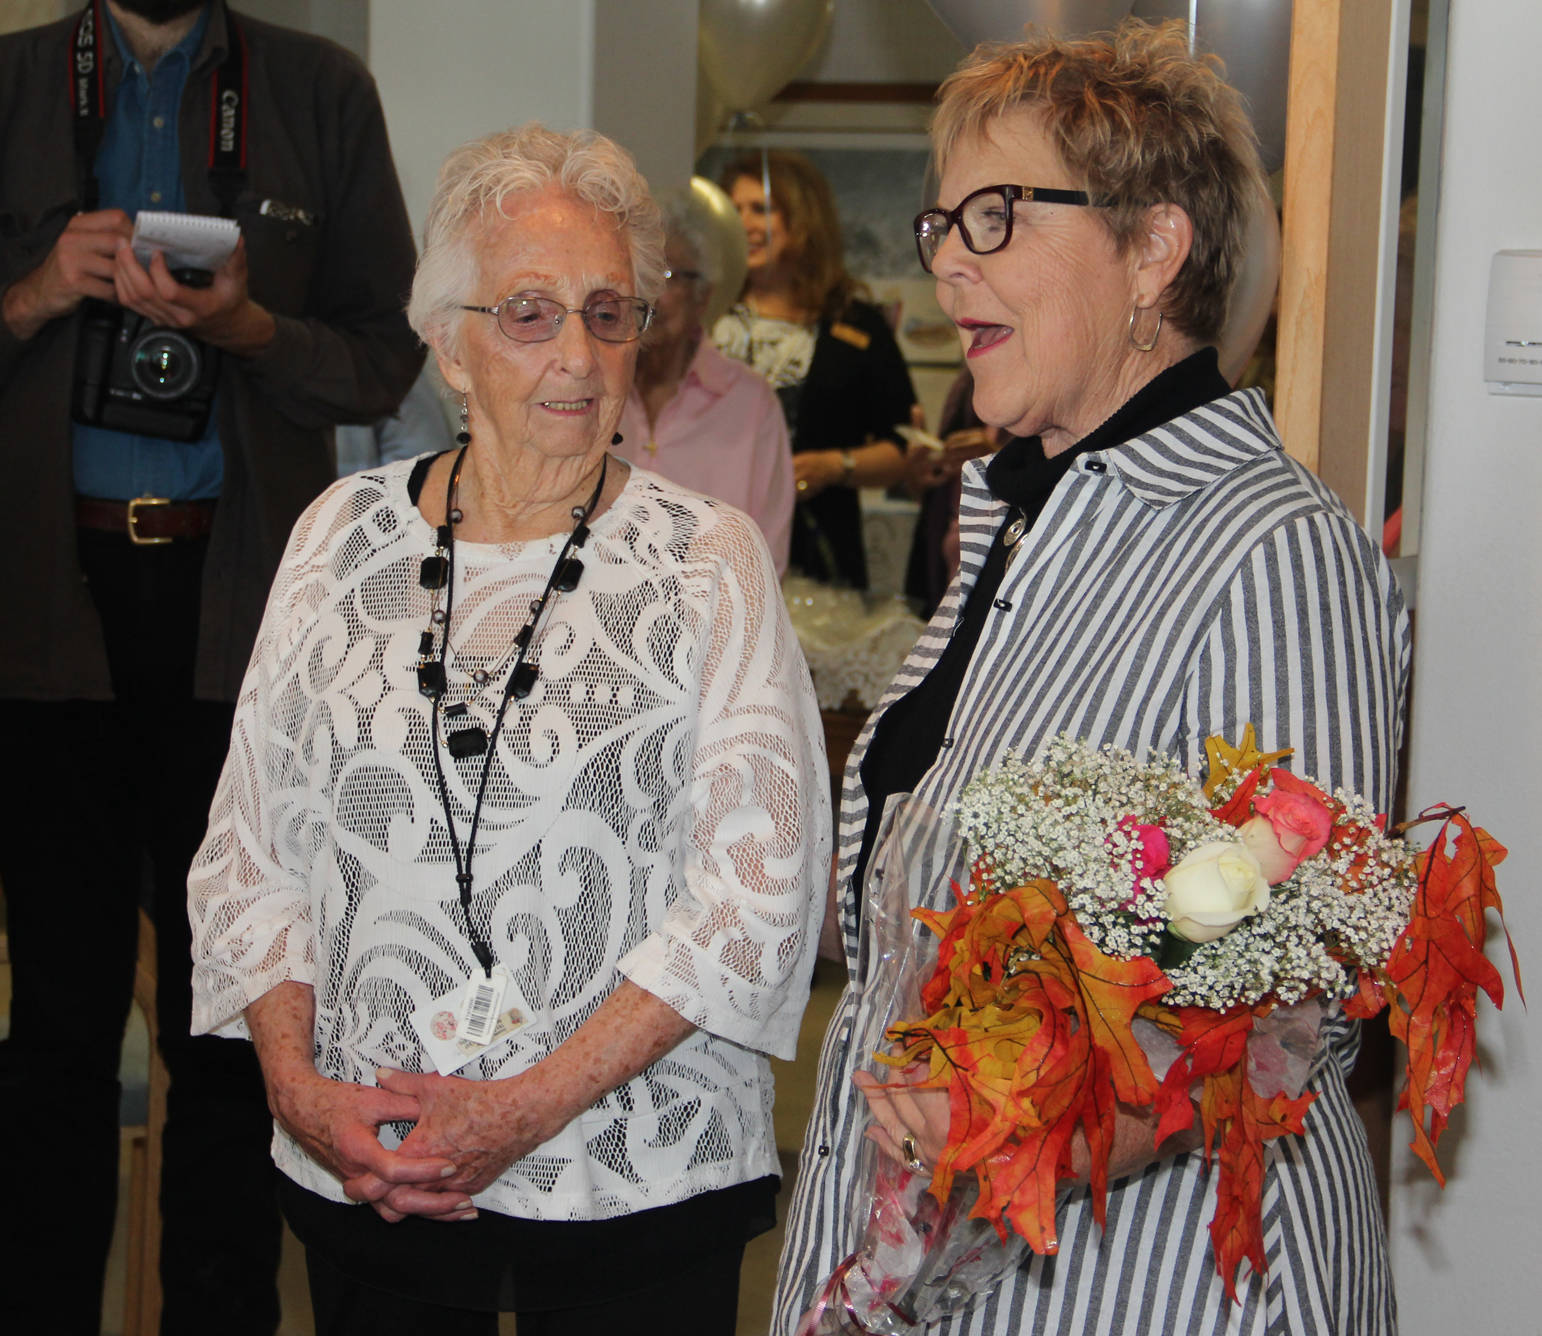 Pat Porter congratulates JoAnne Hollier, one of the first Vintage Pointe residents.